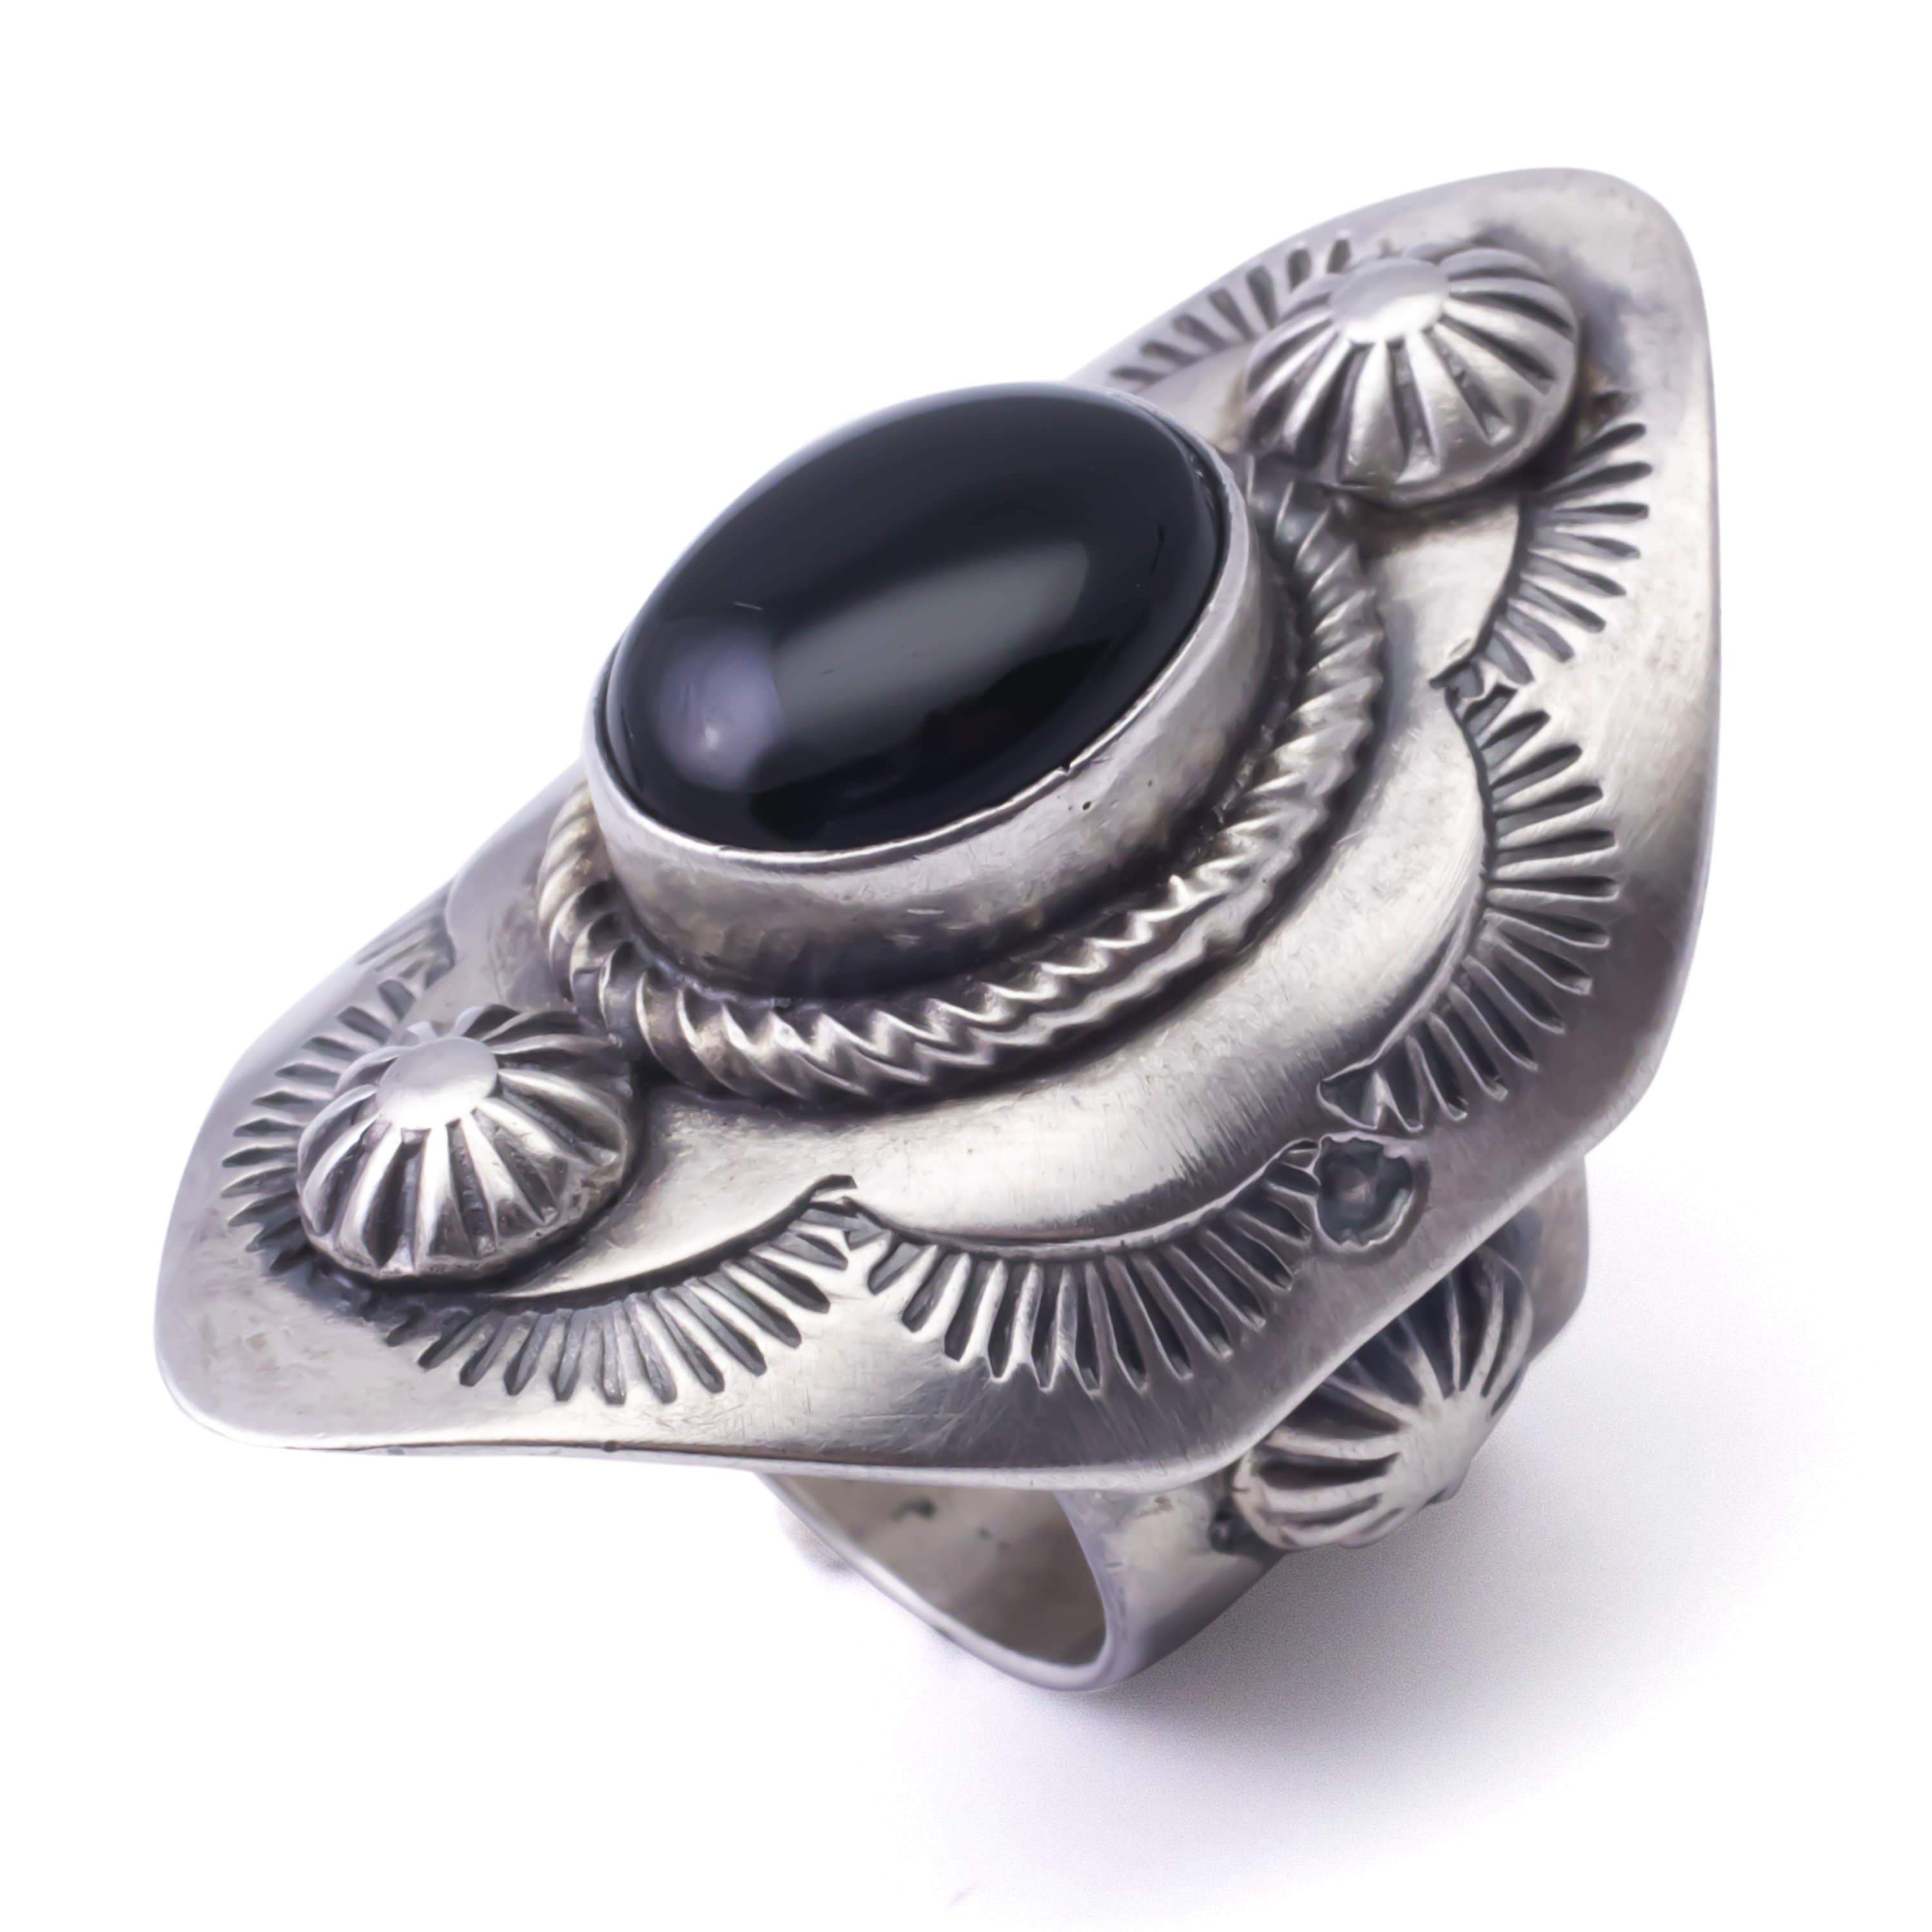 Kalifano Native American Jewelry 5 Bobby Johnson Black Onyx Native American Made 925 Sterling Silver Ring NAR600.003.5